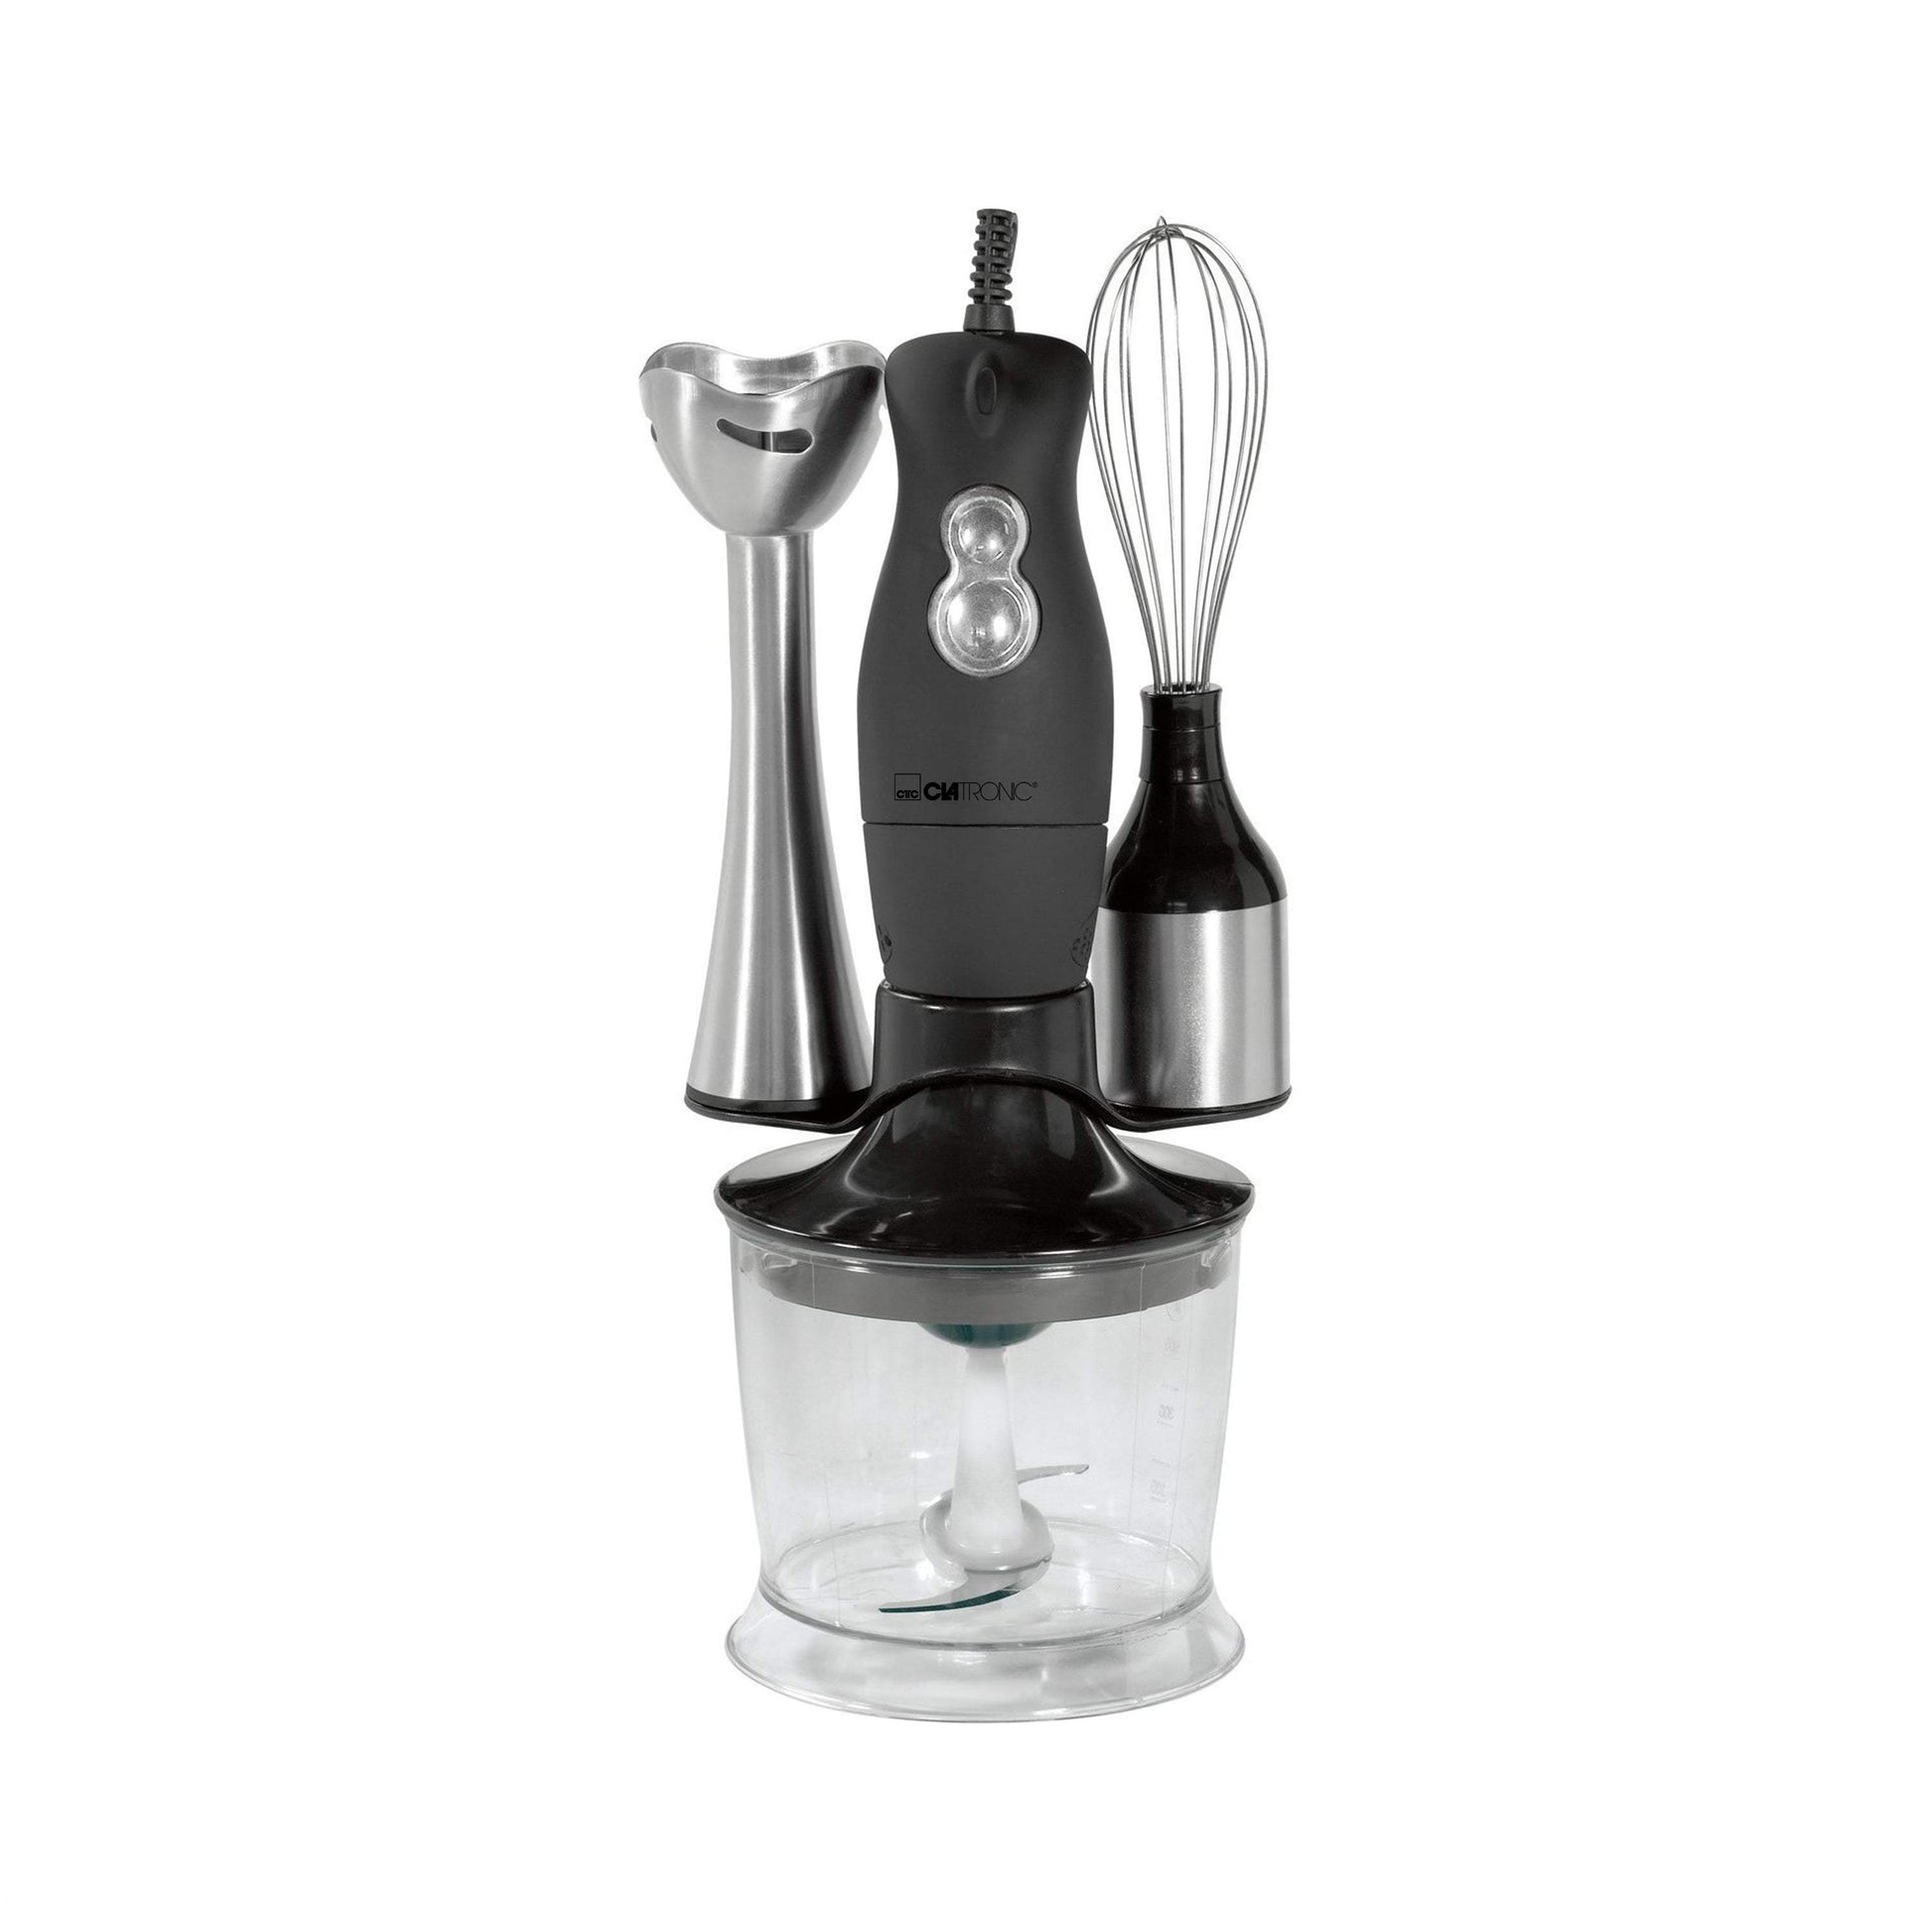 Clatronic SMS3190 Hand-held blender 200 W with blender attachment, Whisk attachment, with mixing jar Black-Royal Brands Co-